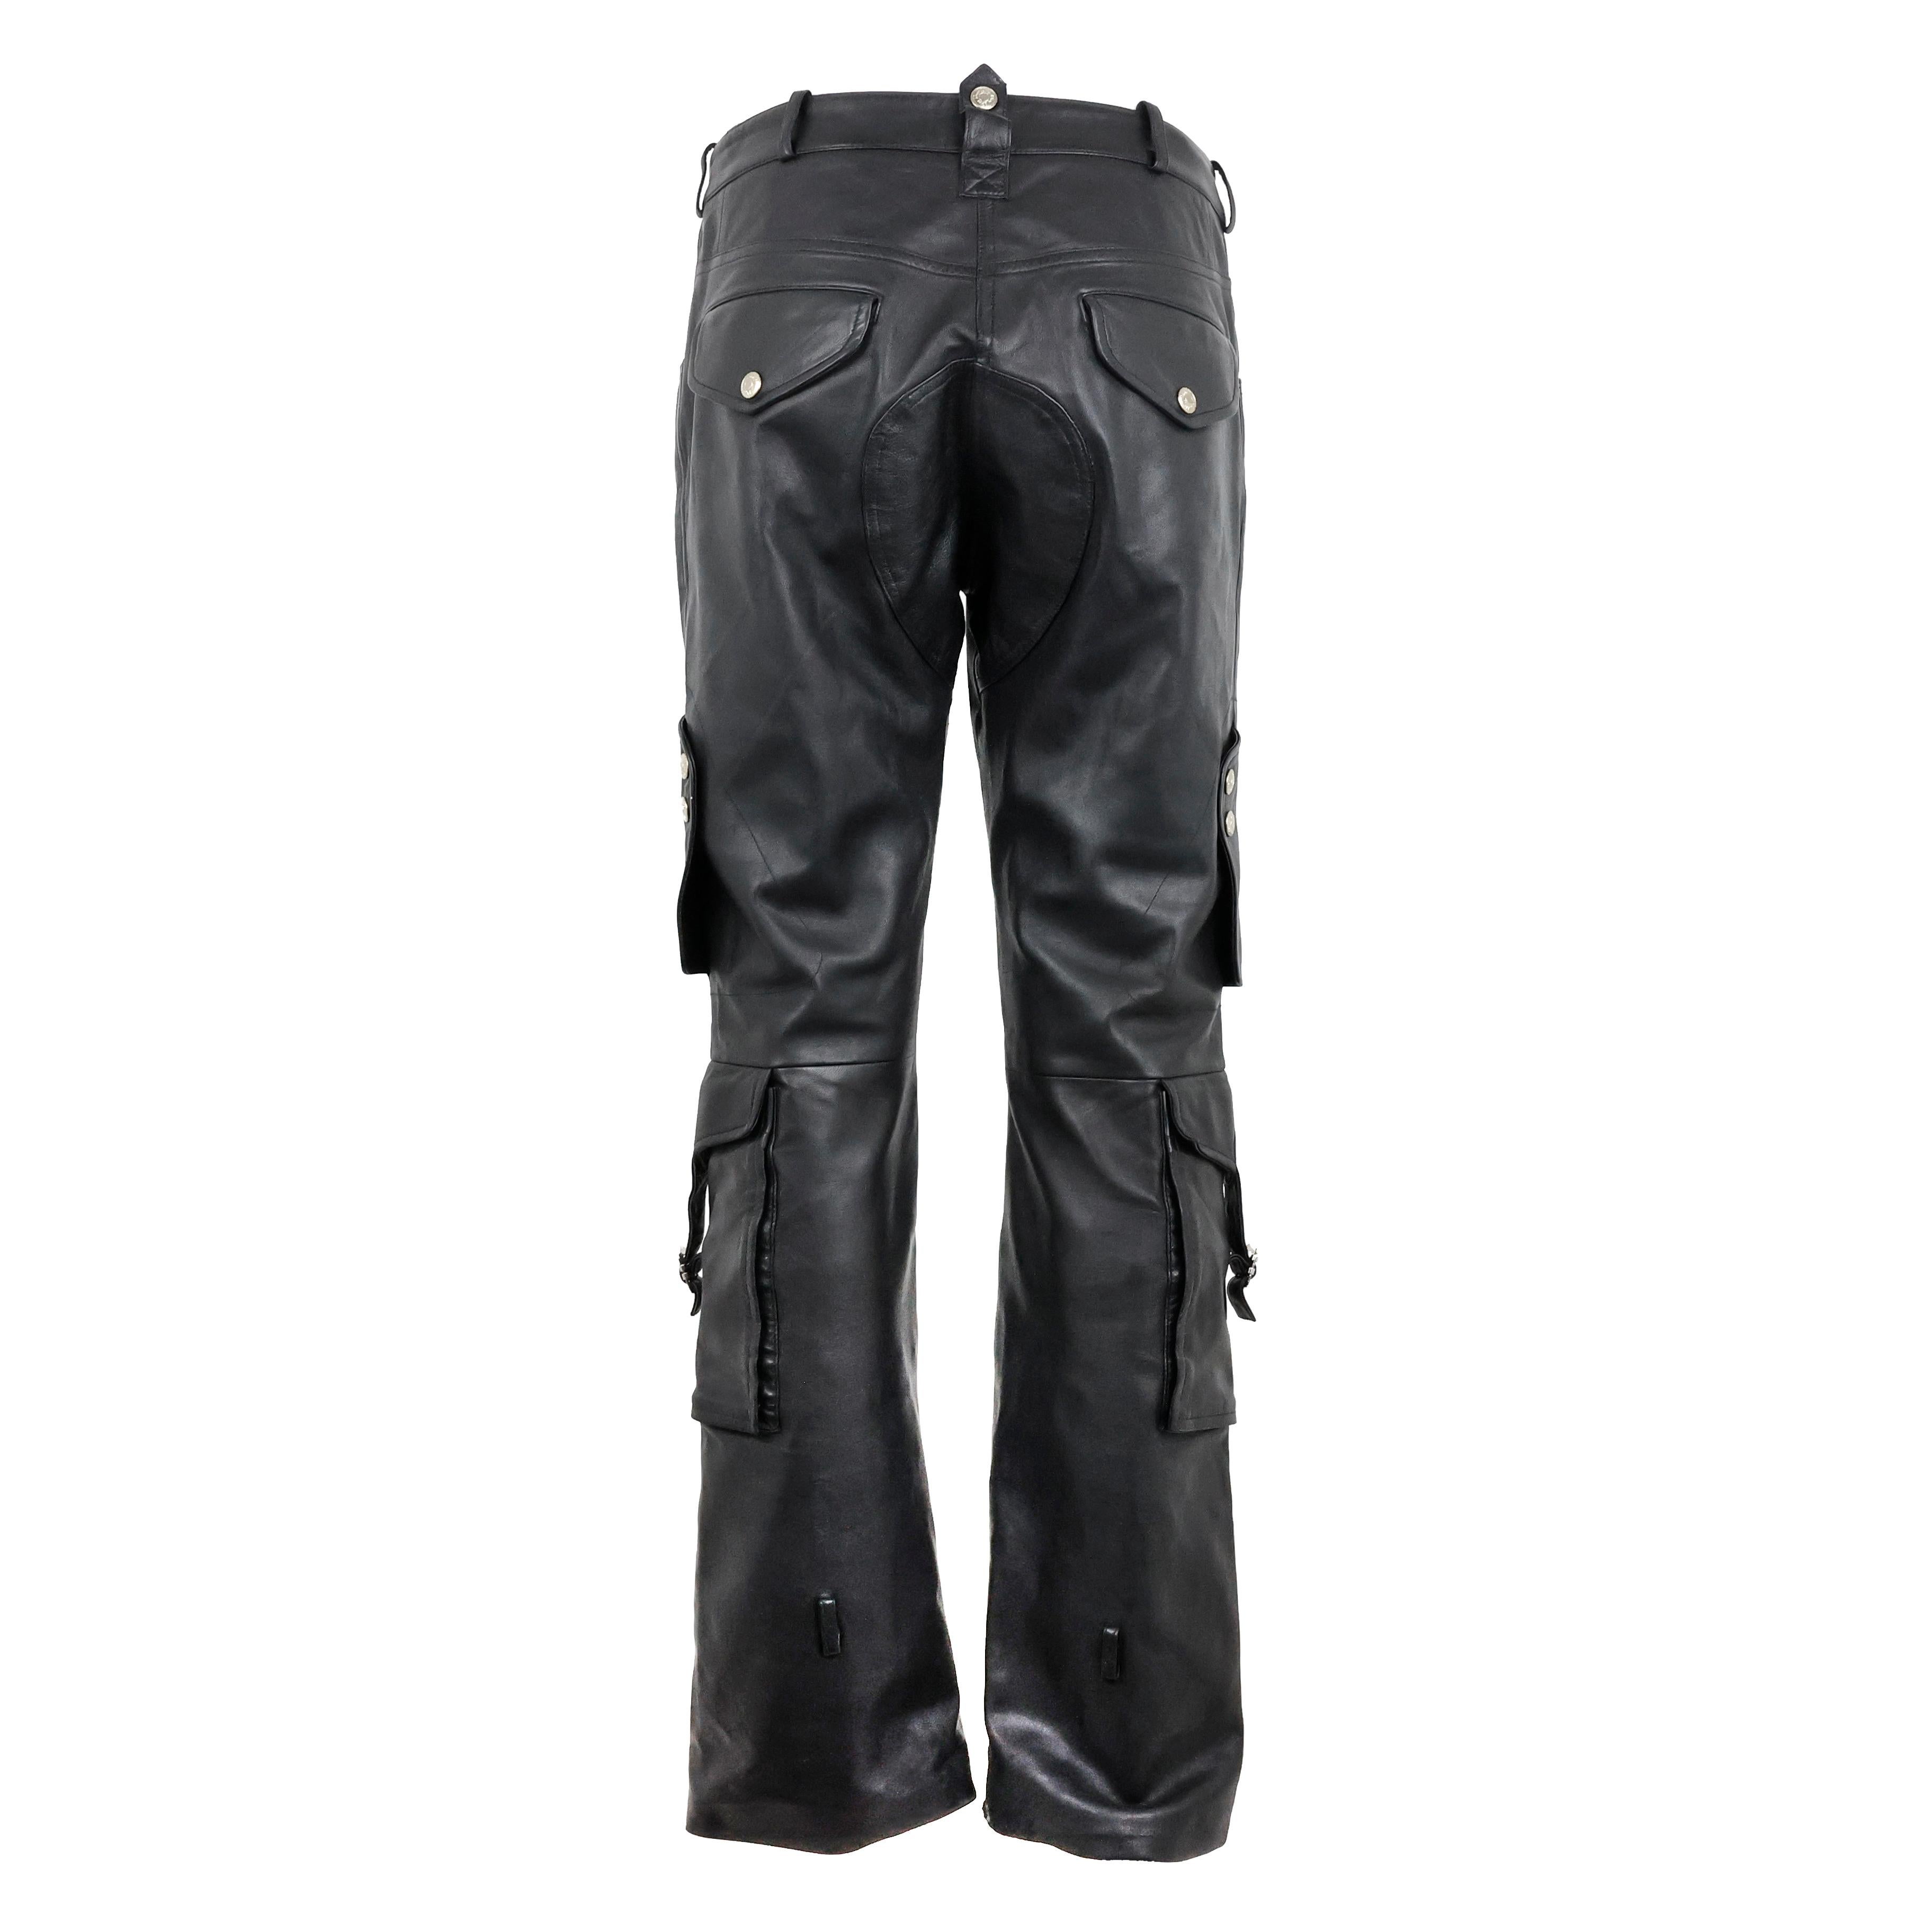 Christian Dior by John Galliano cargo leather pants color black. Size 38 FR.

Condition:
Really good/good. Minimal and not visible signs of wear.